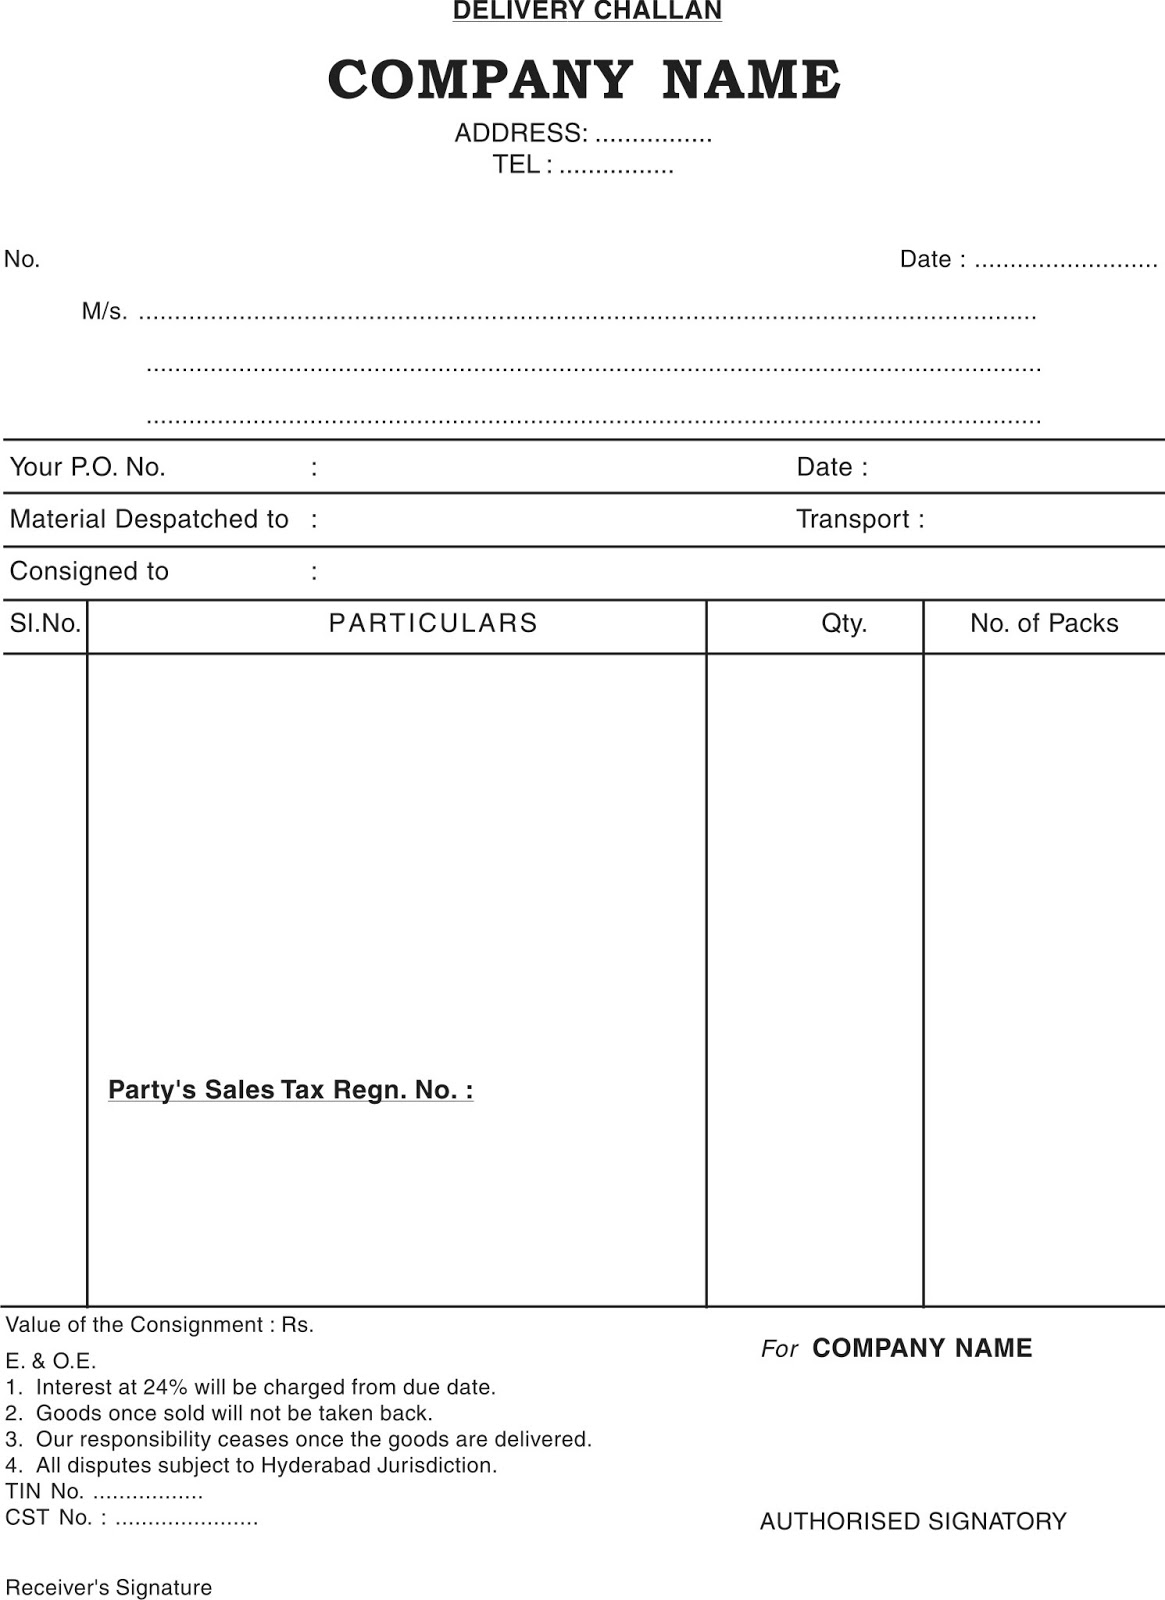 simple invoice free blank invoice template software to create training invoice template